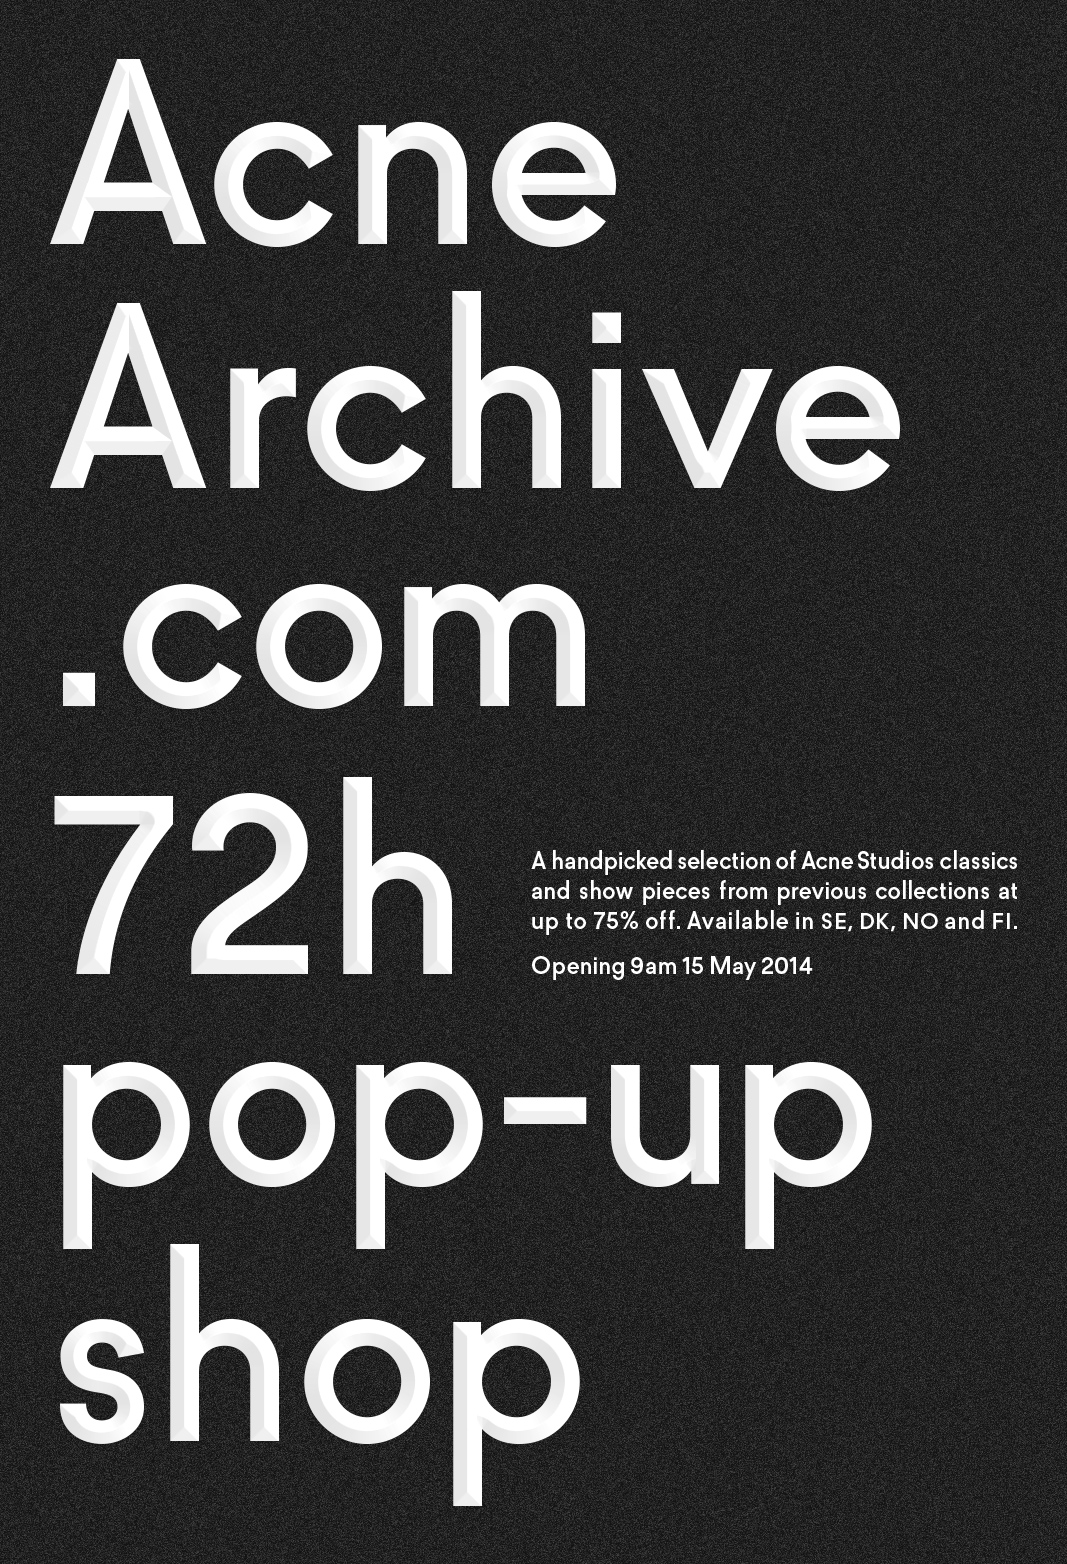 Acne_Archive-Flyer1